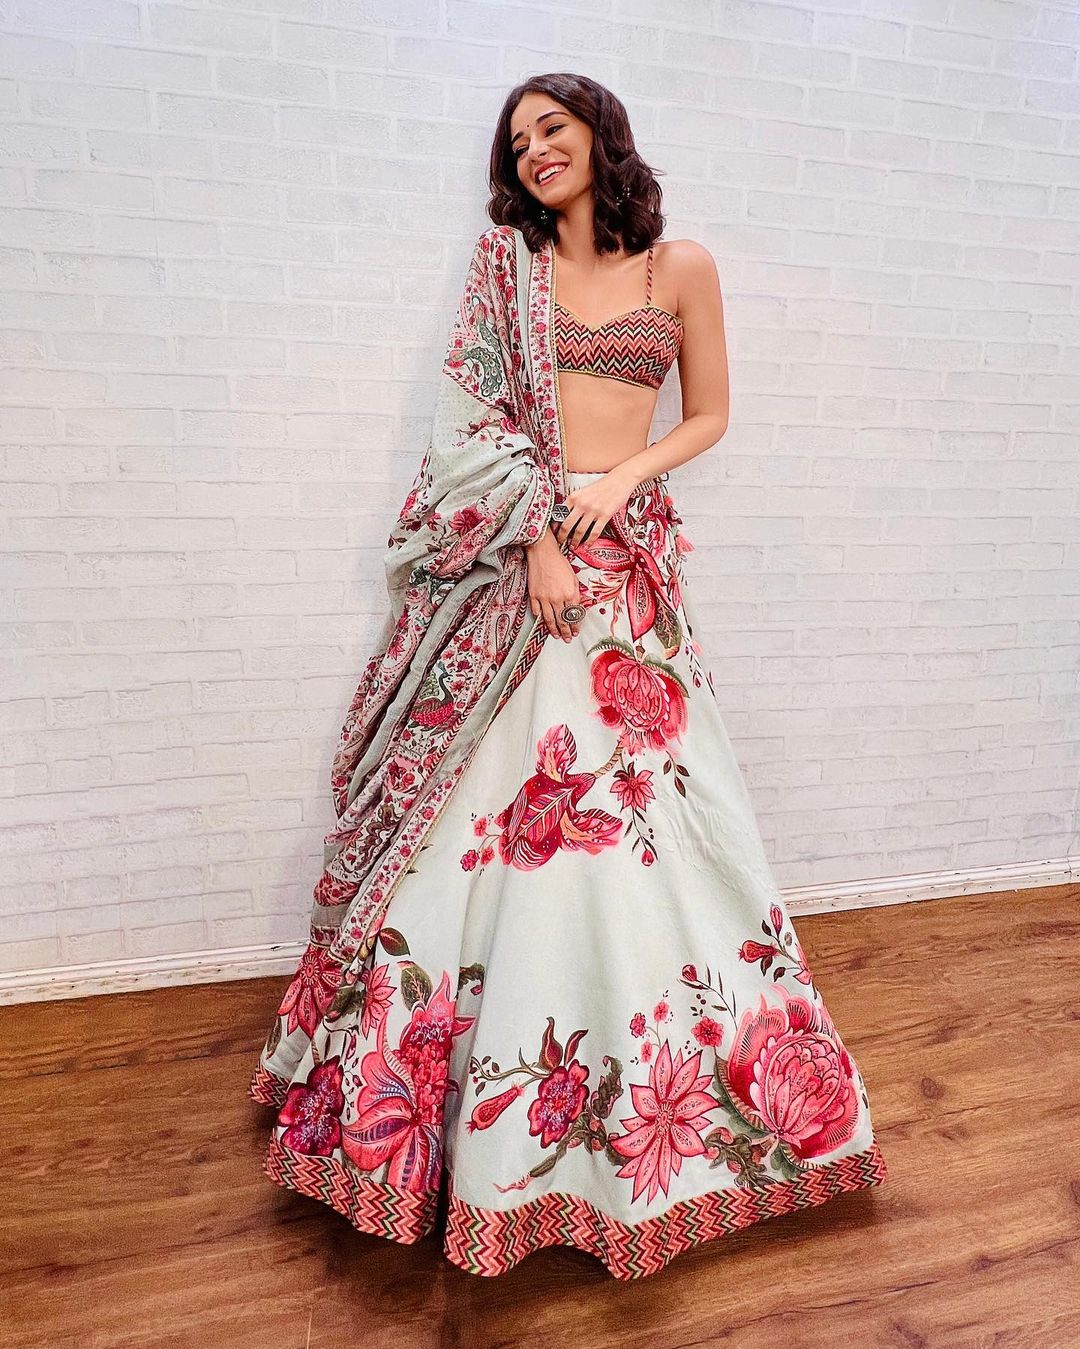 Celeb Style Alert: You Must Zoom In To See The Details Of Ananya Panday's Fab Floral Lehenga: Ananya Panday. Photo Credit: www.instagram.com